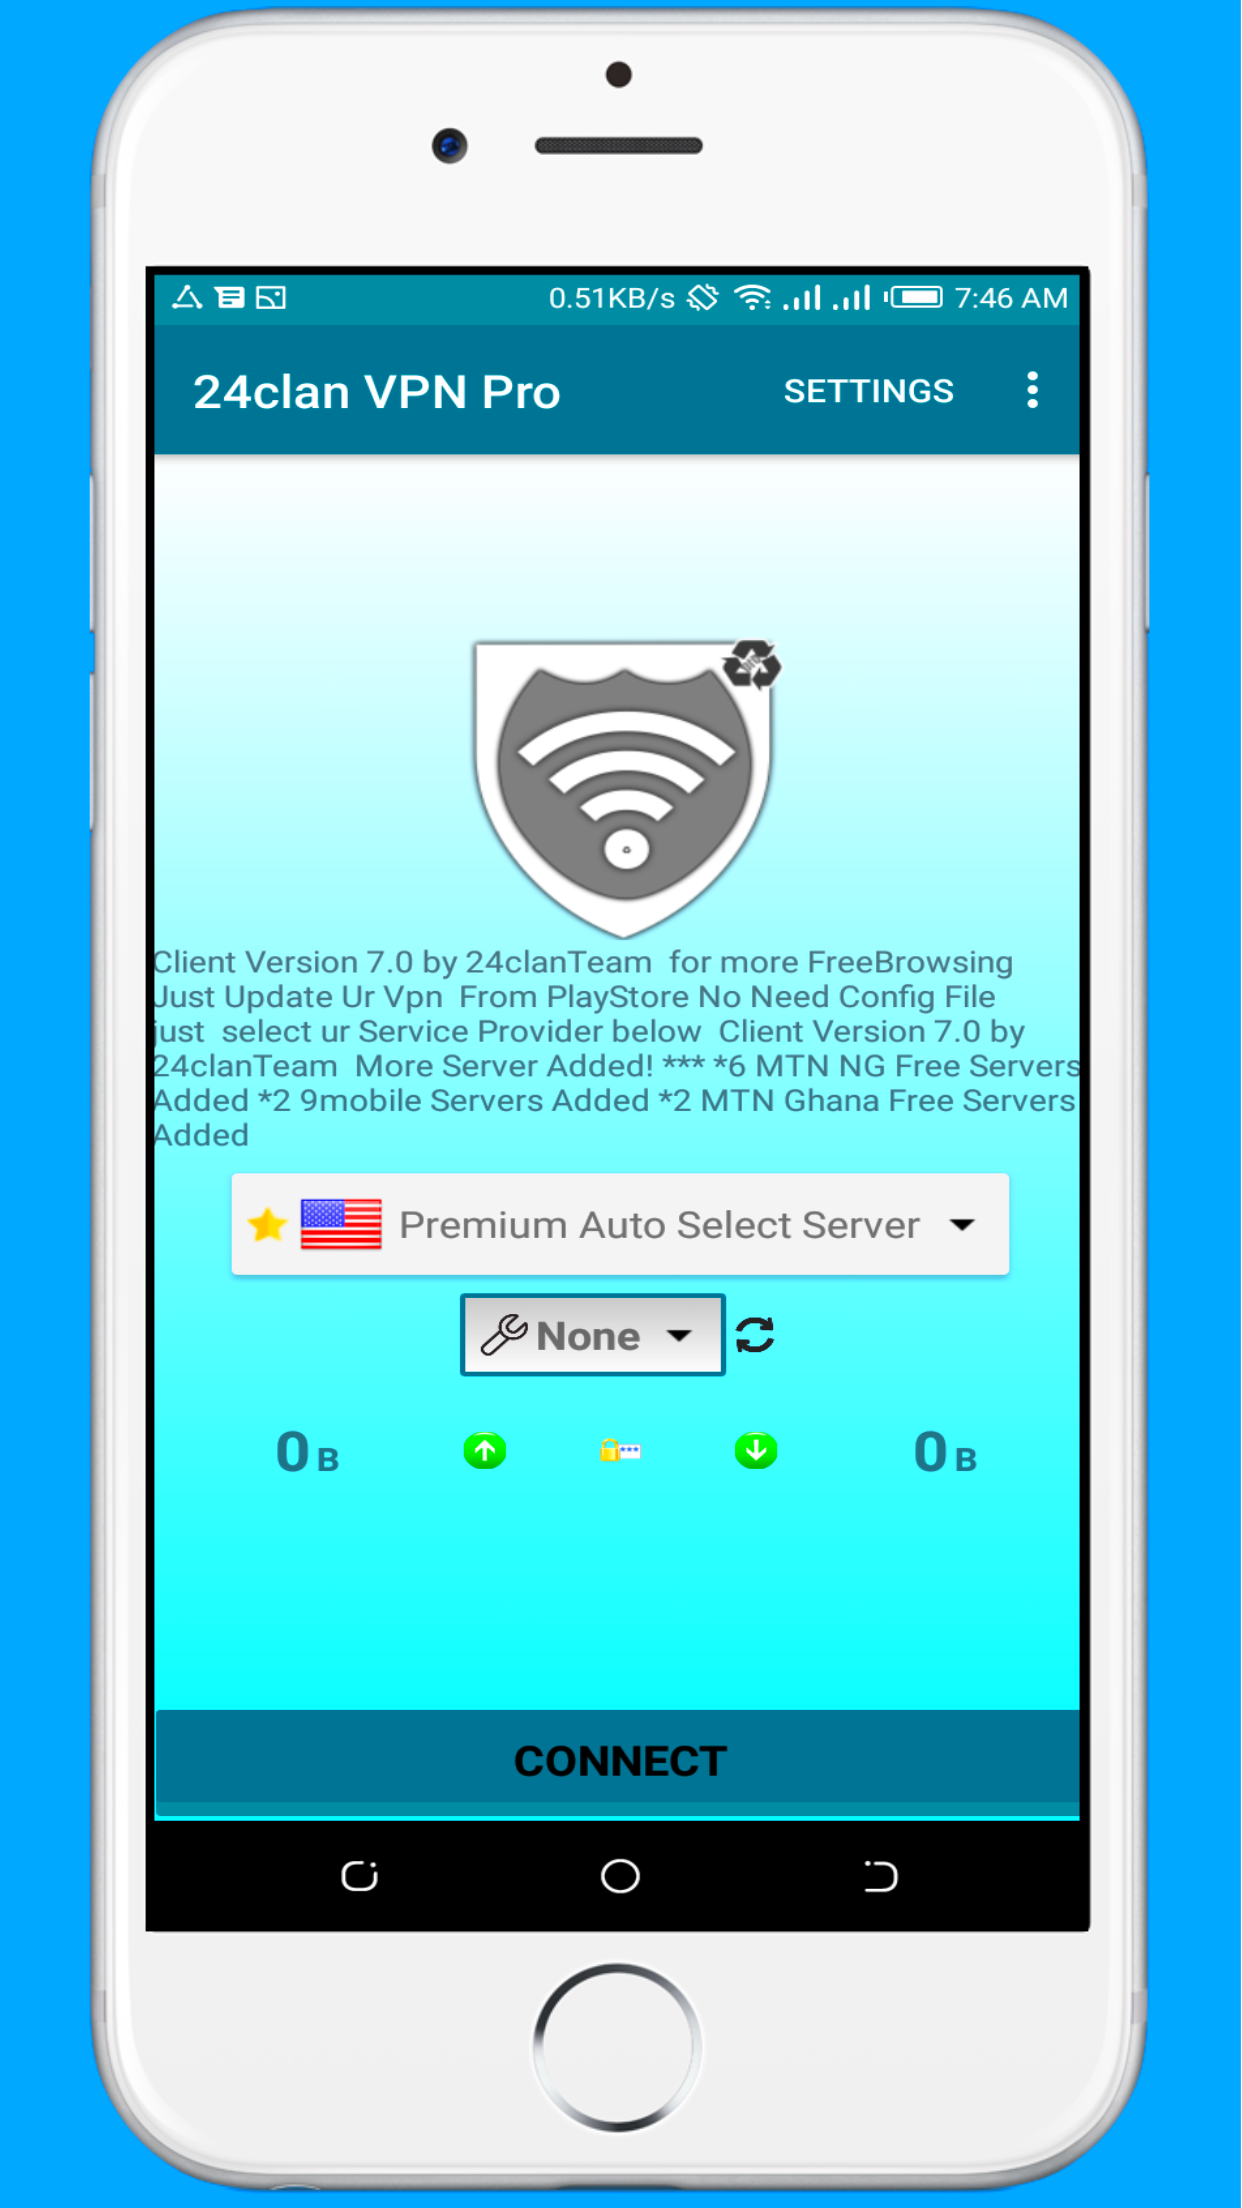 24clan VPN Pro - Free Internet For All Countries for Android ... - 